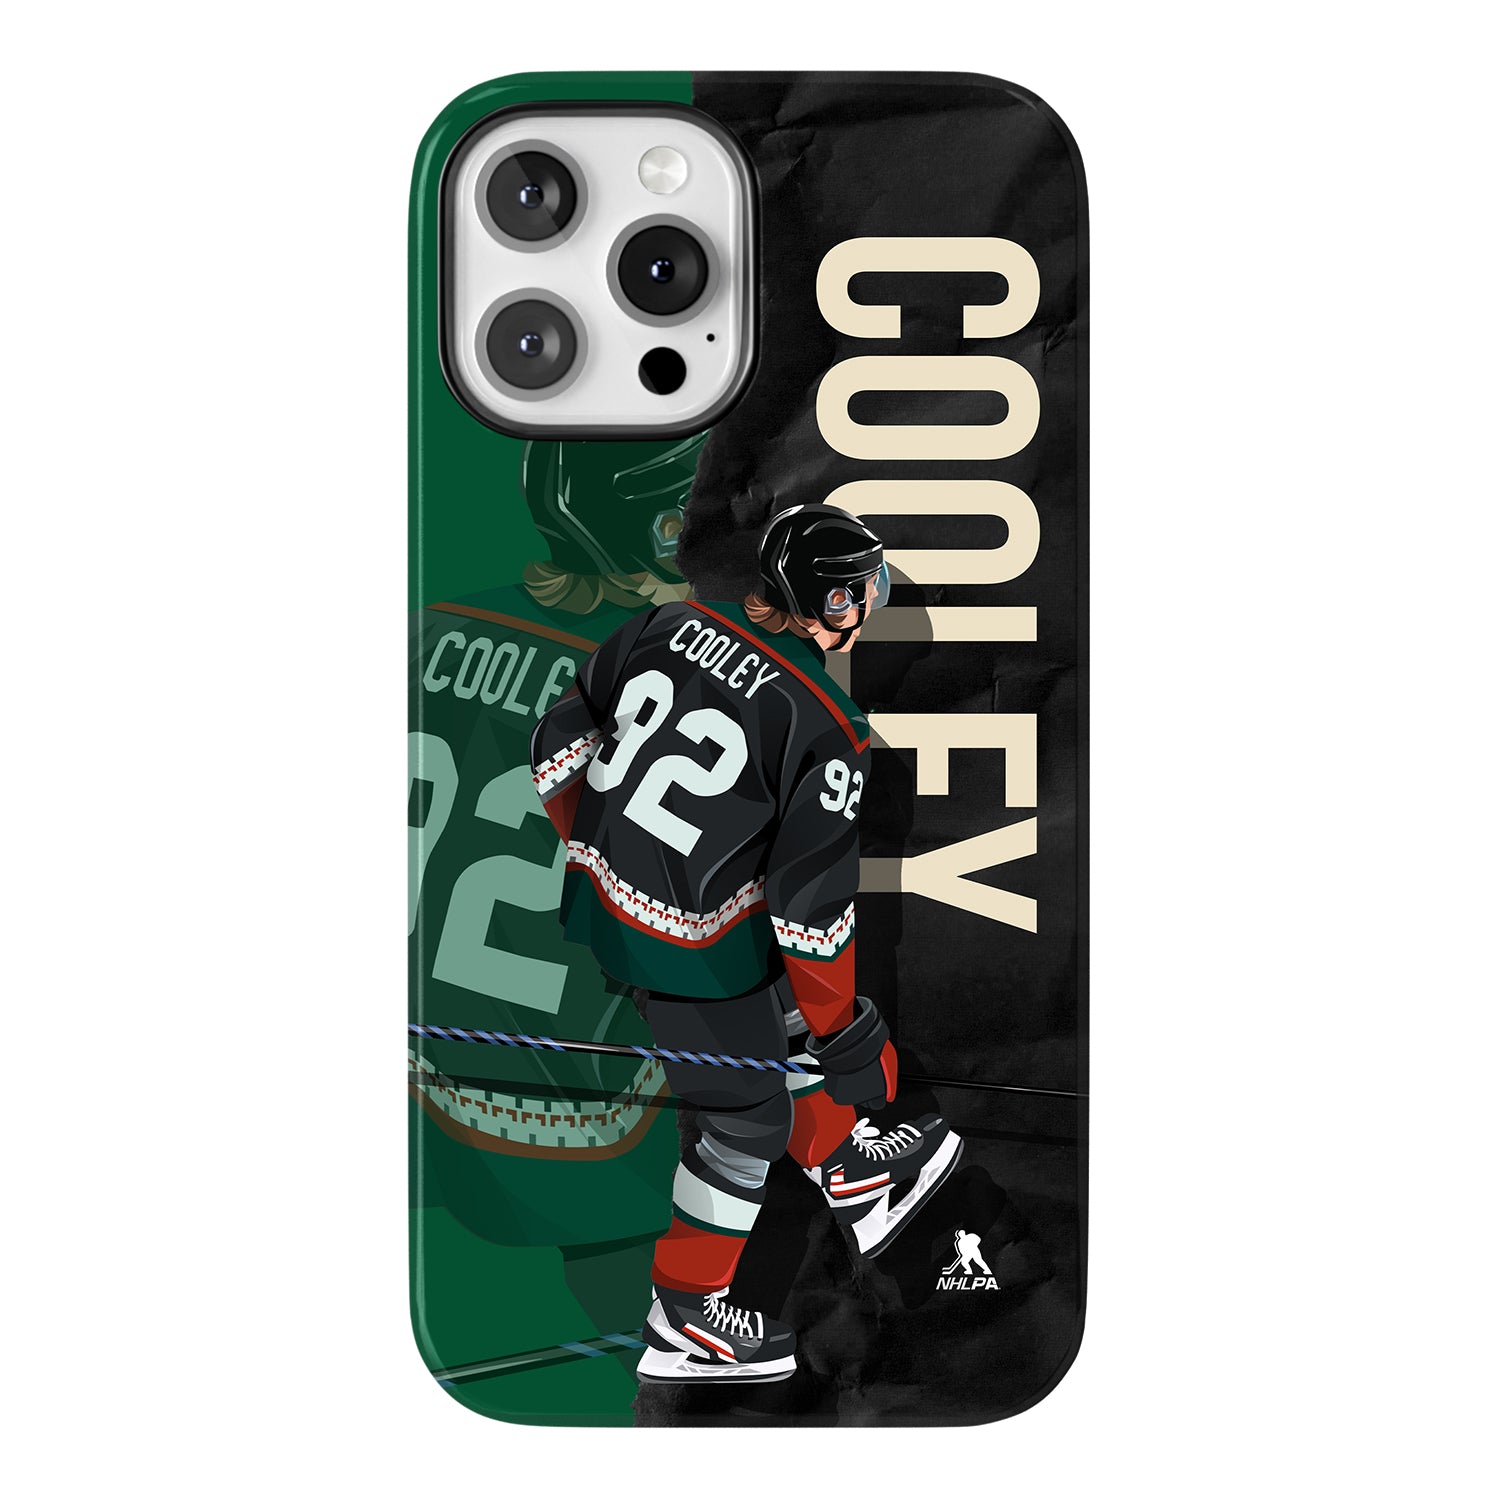 Cooley Star Series 3.0 Phone Case